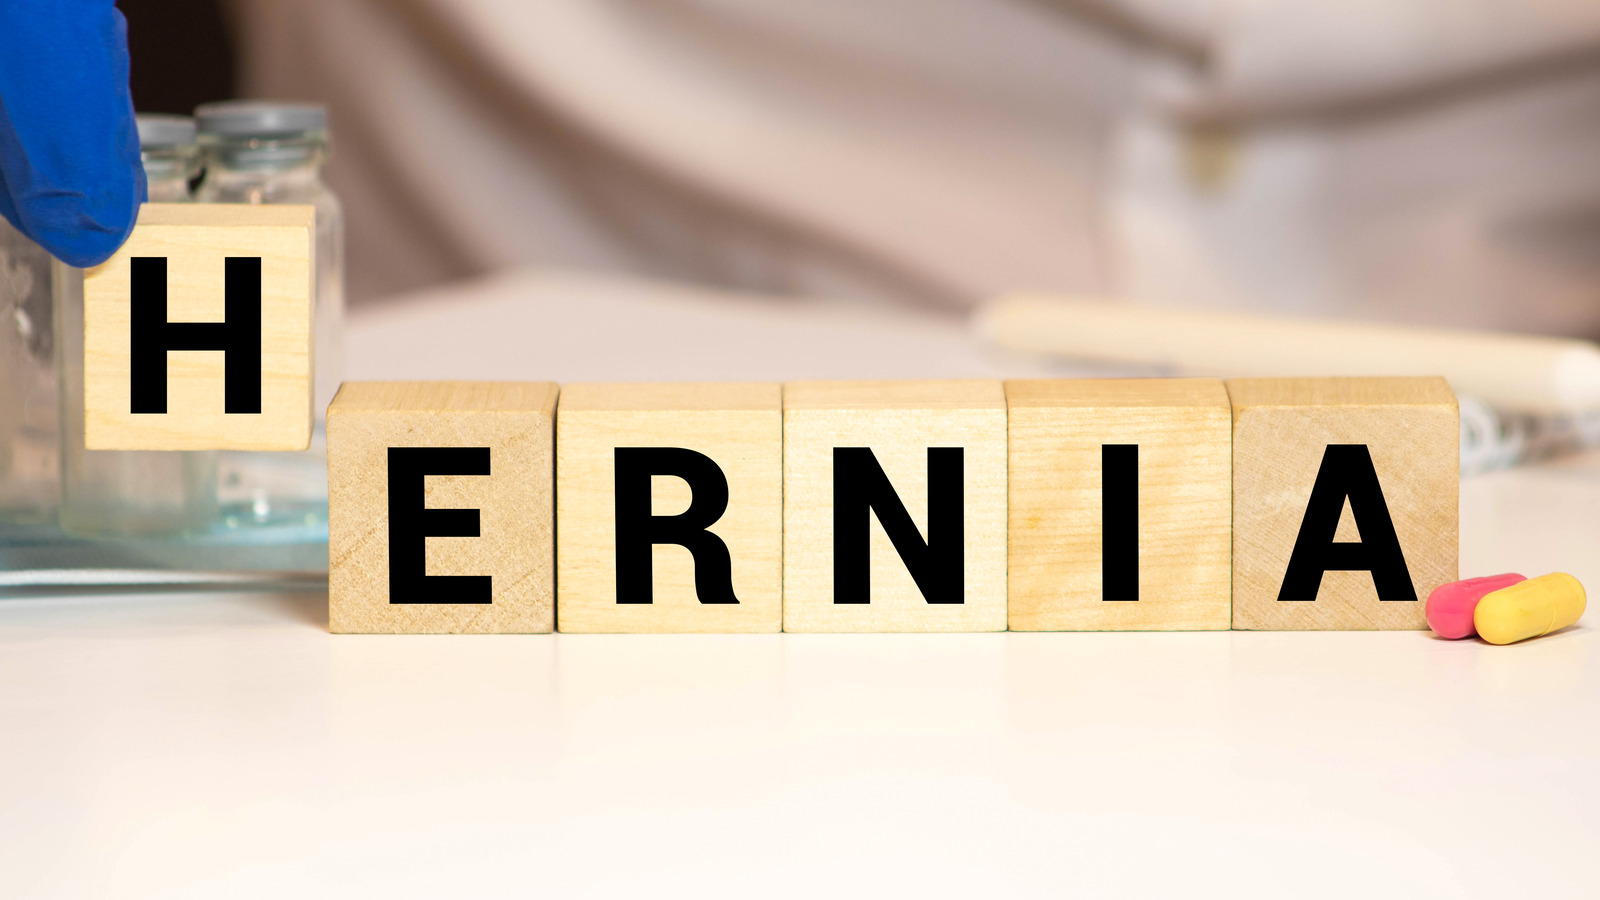 This Is What You Can Do To Prevent A Hernia